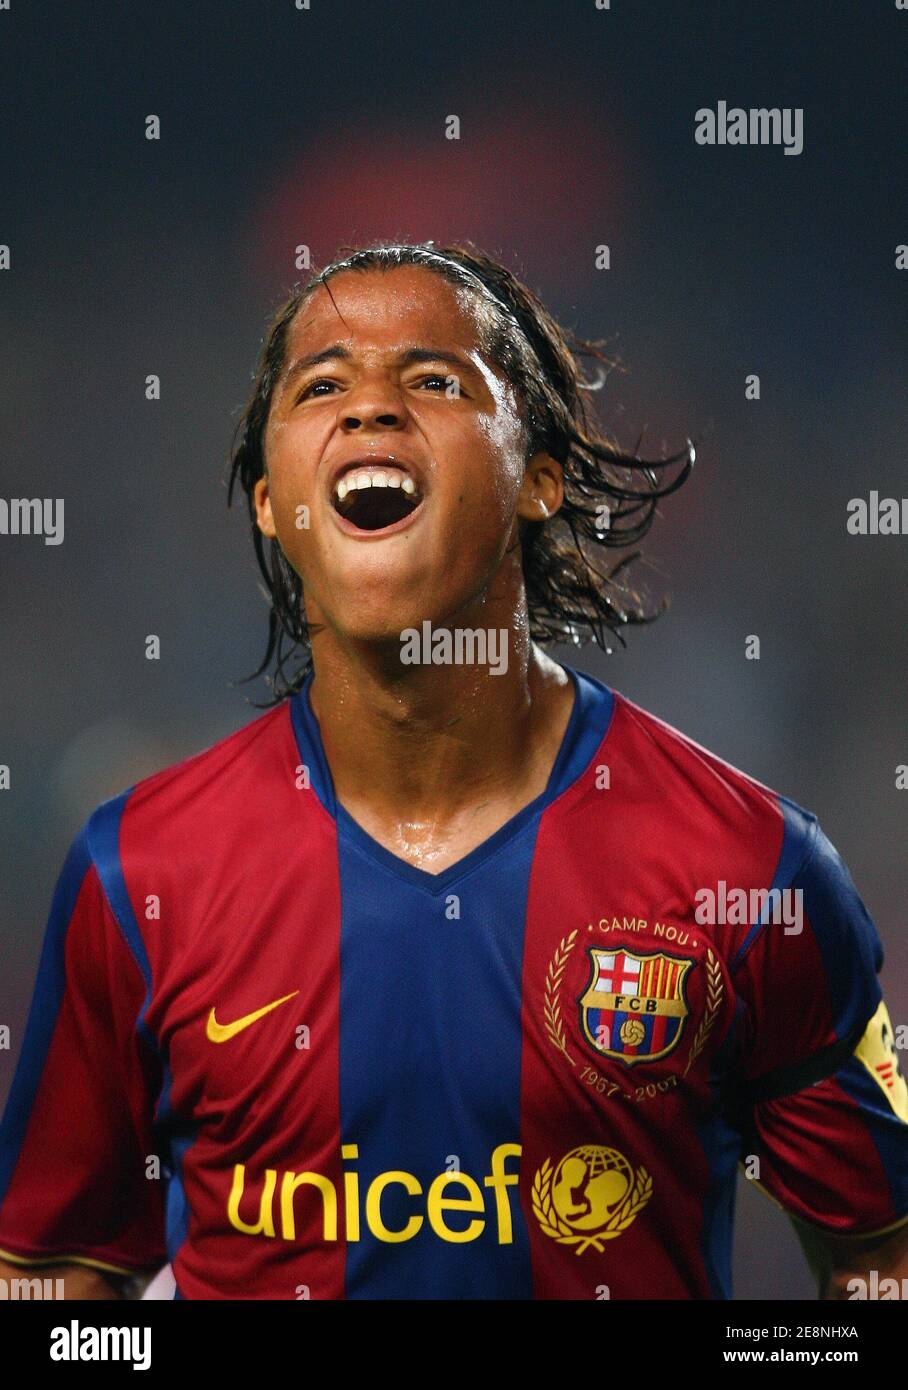 FC Barcelona's Giovani Dos Santos celebrates his goal during the club's  Joan Gamper Trophy match, FC Barcelona vs Inter Milan at the Camp Nou  stadium in Barcelona, Spain on August 29, 2007.